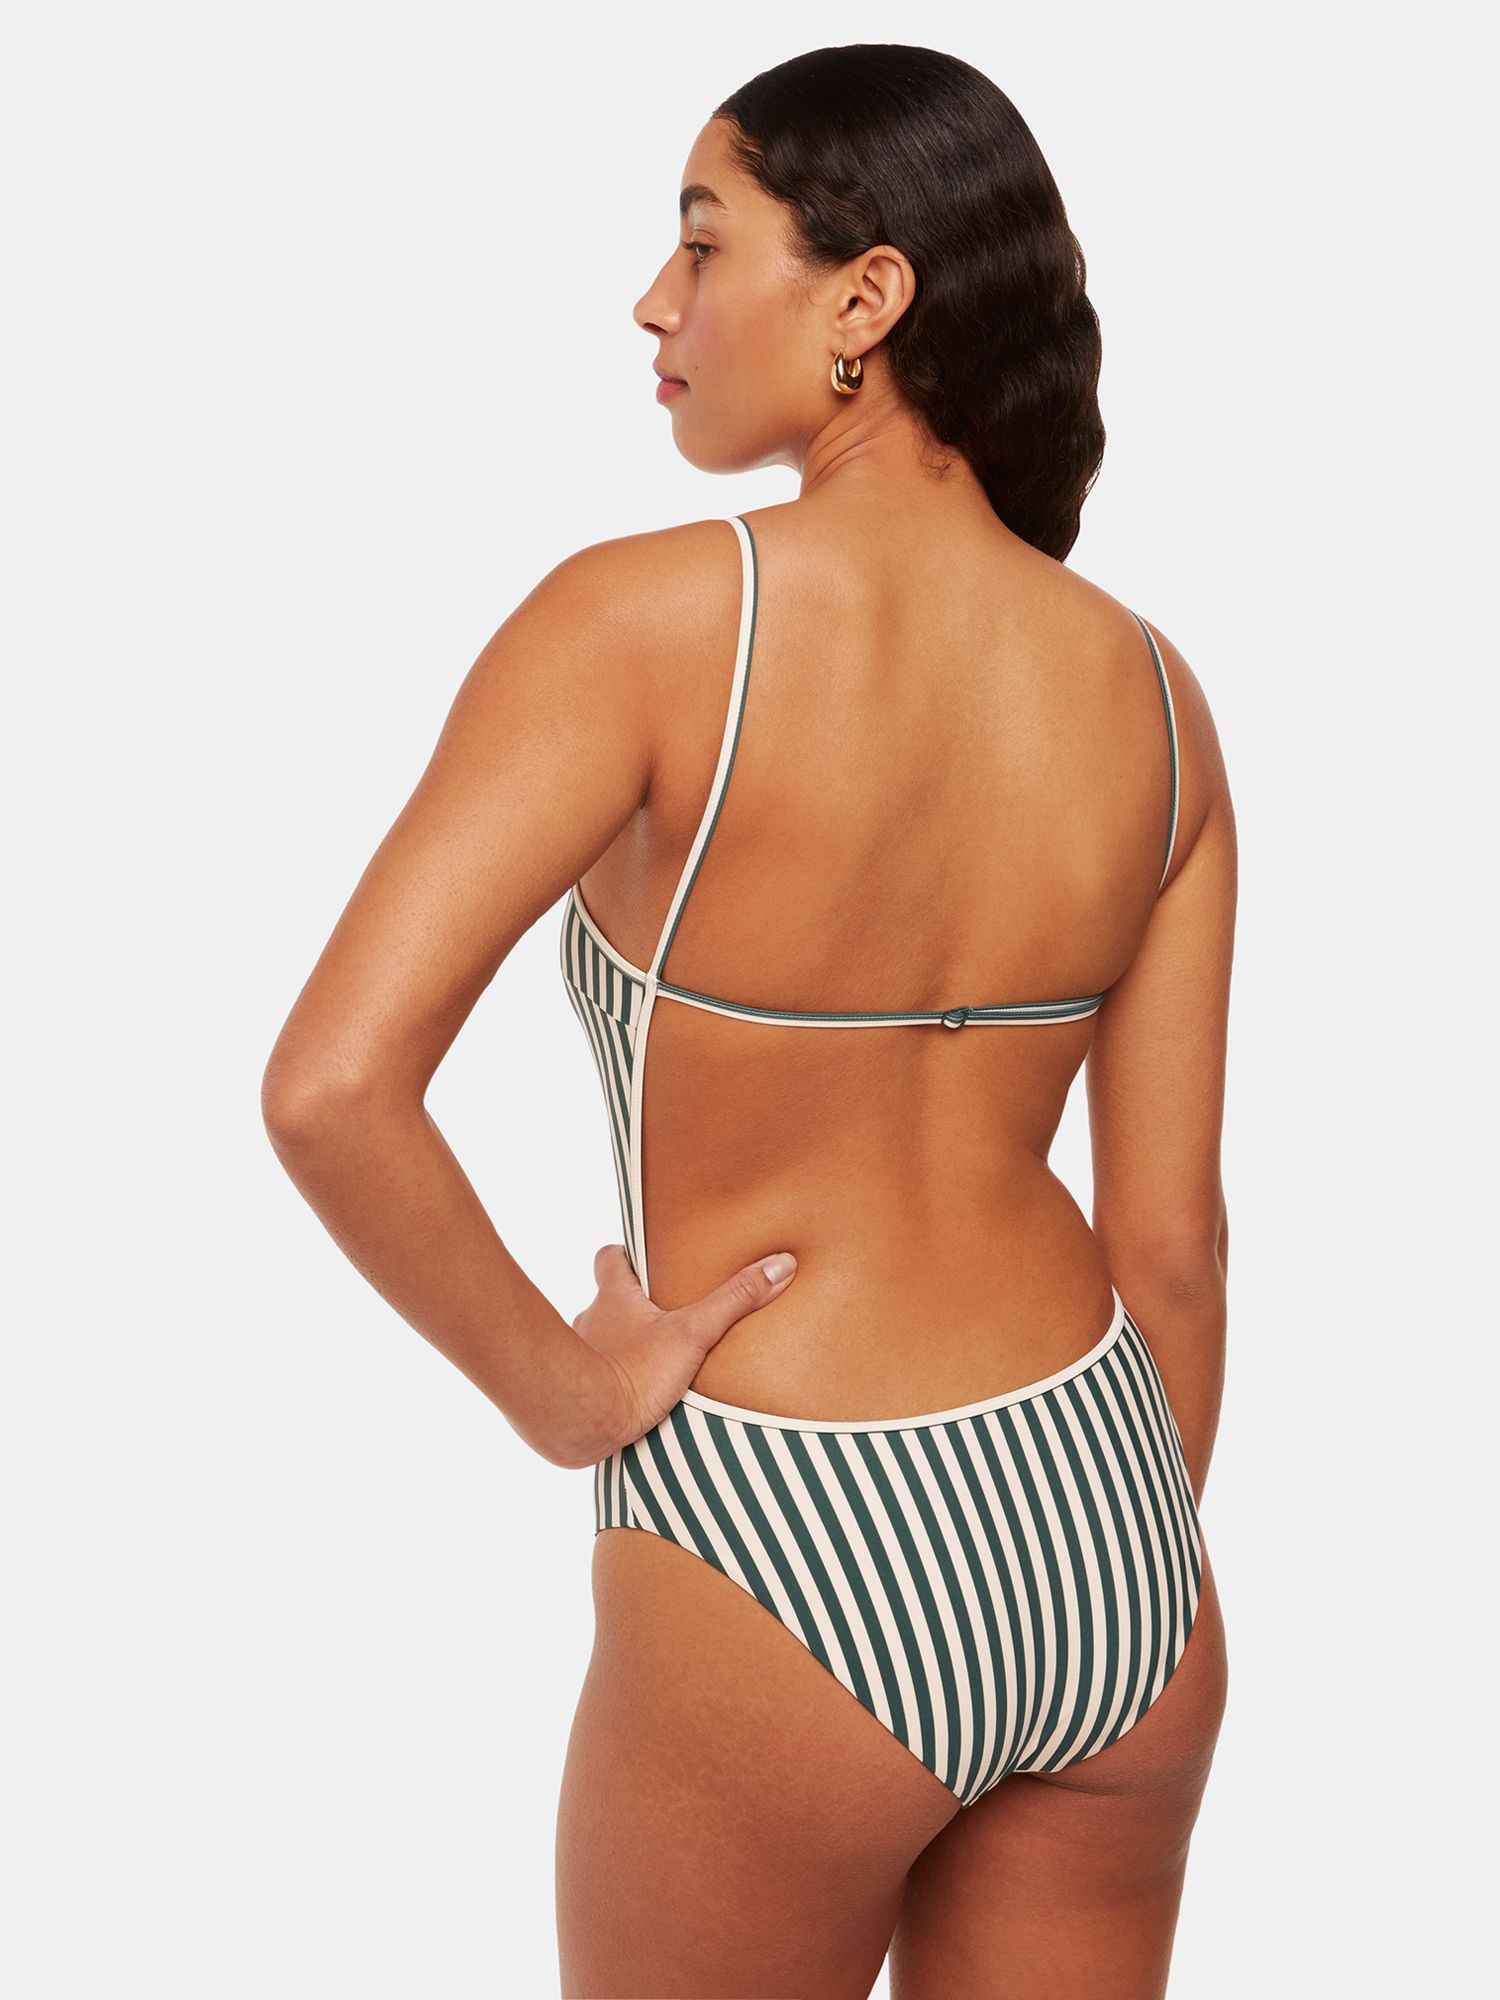 Buy Whistles Striped Open Back Swimsuit, Green/White Online at johnlewis.com